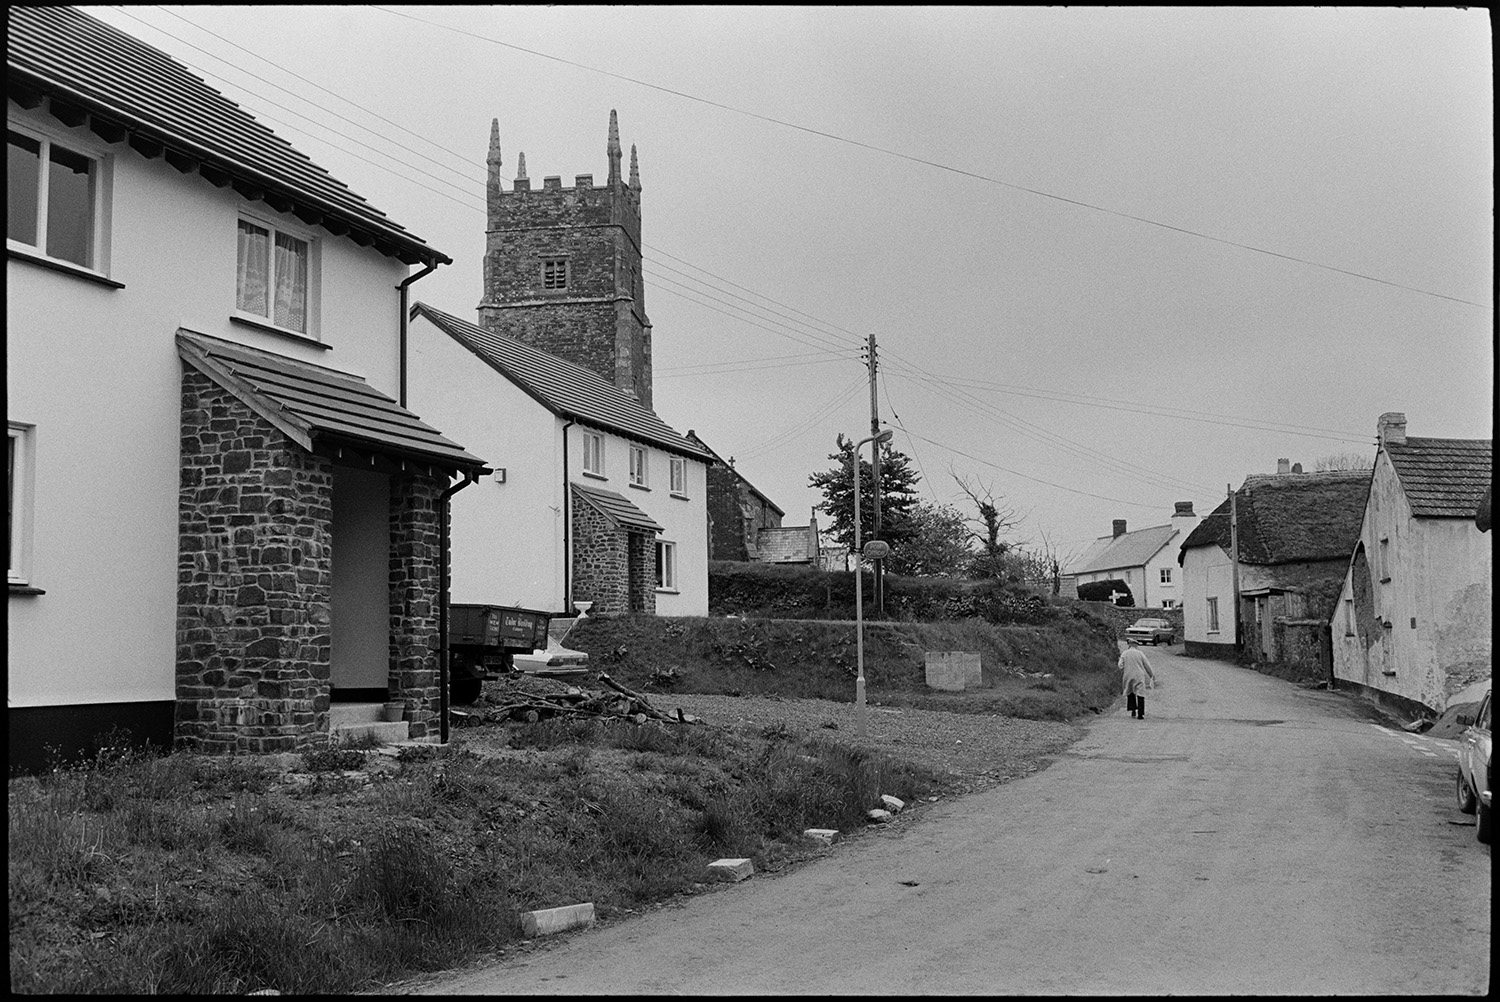 Village with church tower, comparison with old photo.
[ A man walking up a street past cottages, towards the church in Roborough. Two new houses can be seen on the left. ]